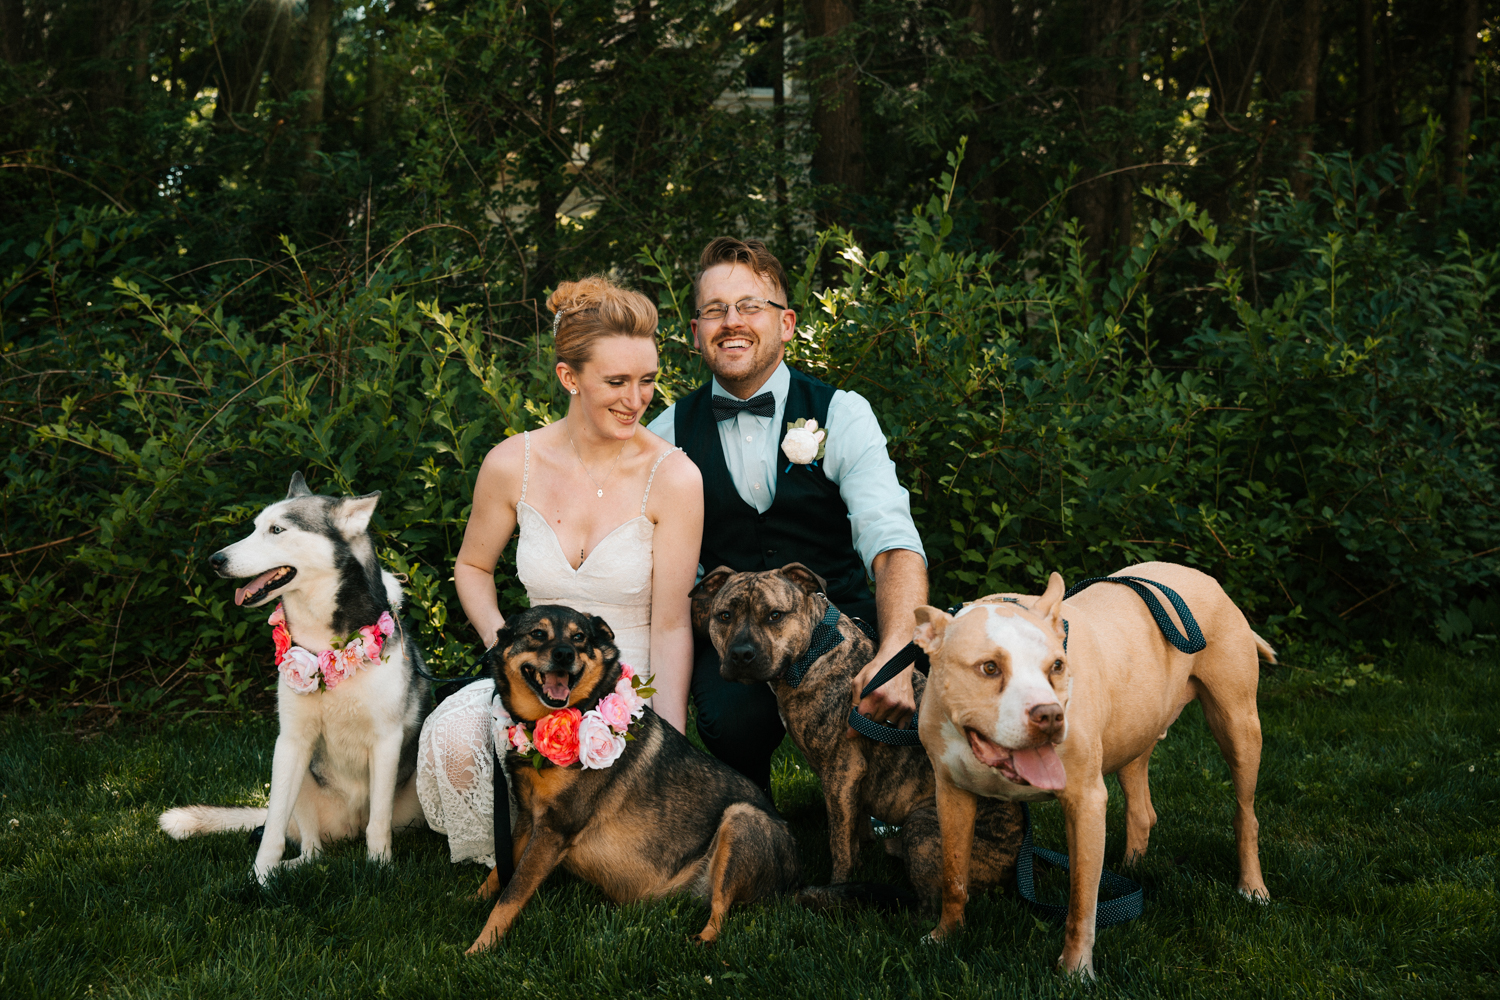 bride-groom-puppies-pets-dogs-happy-laughter-new-england-wedding-photographer-granby-connecticut.jpg